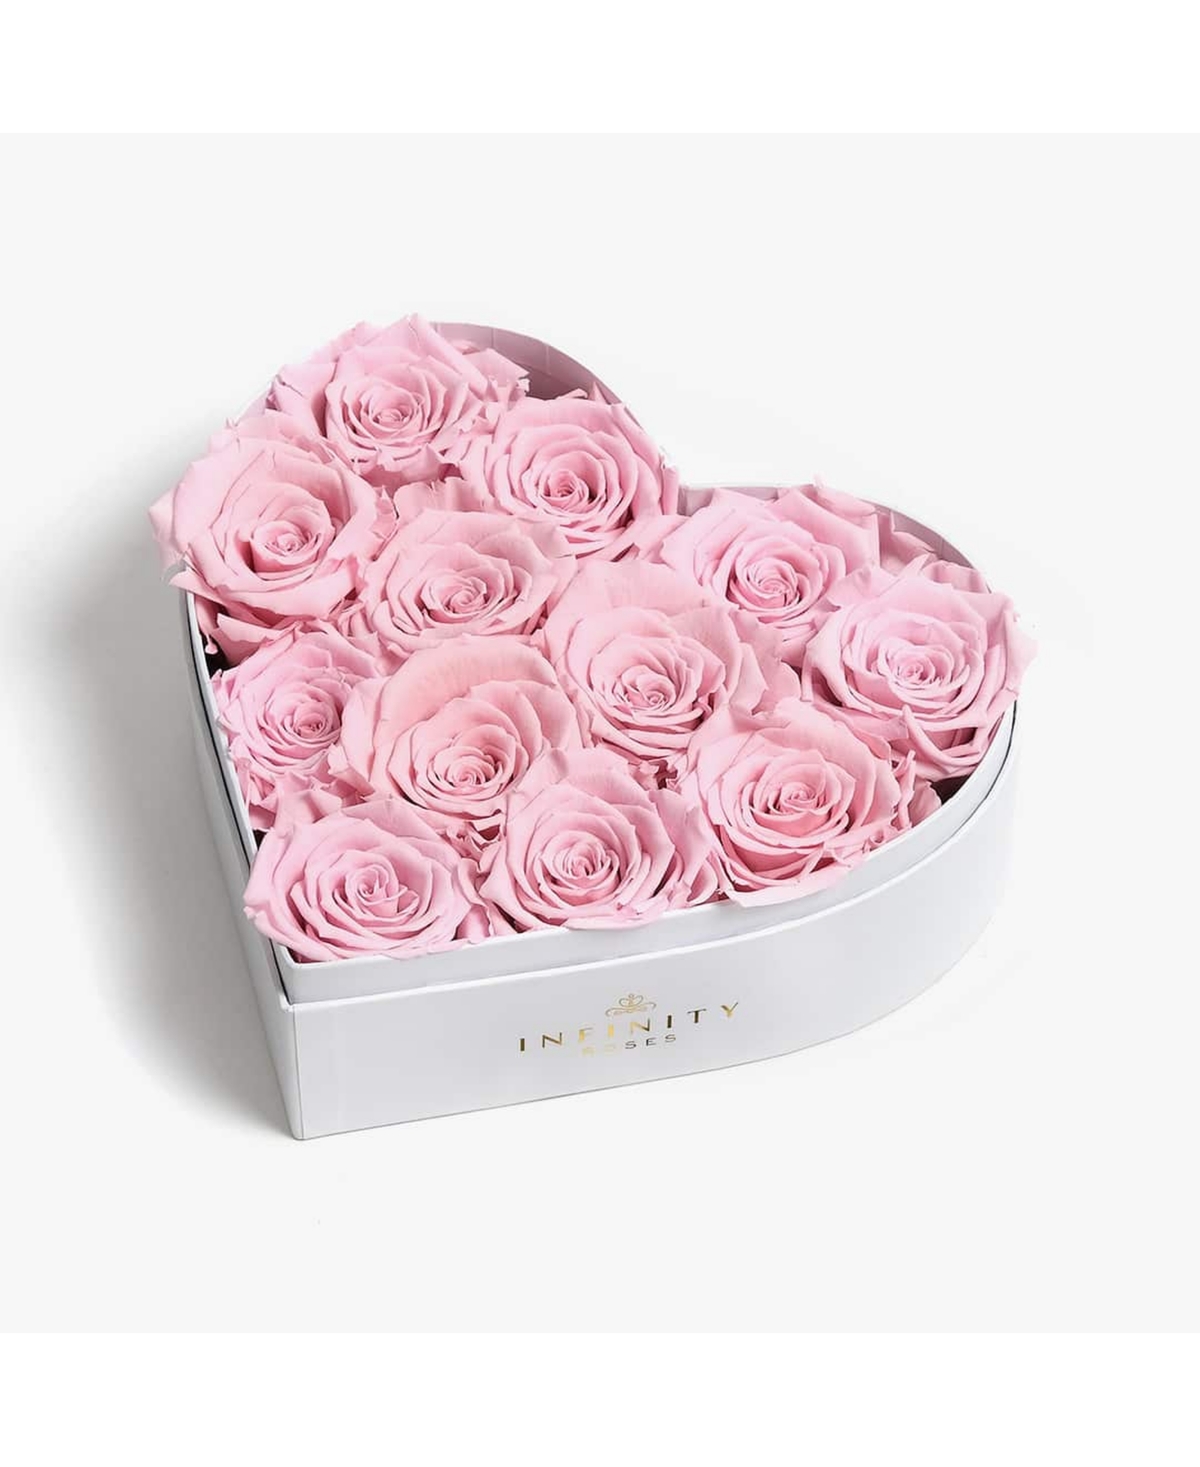 Heart Box of 12 Pink Real Roses Preserved to Last Over a Year - Pink